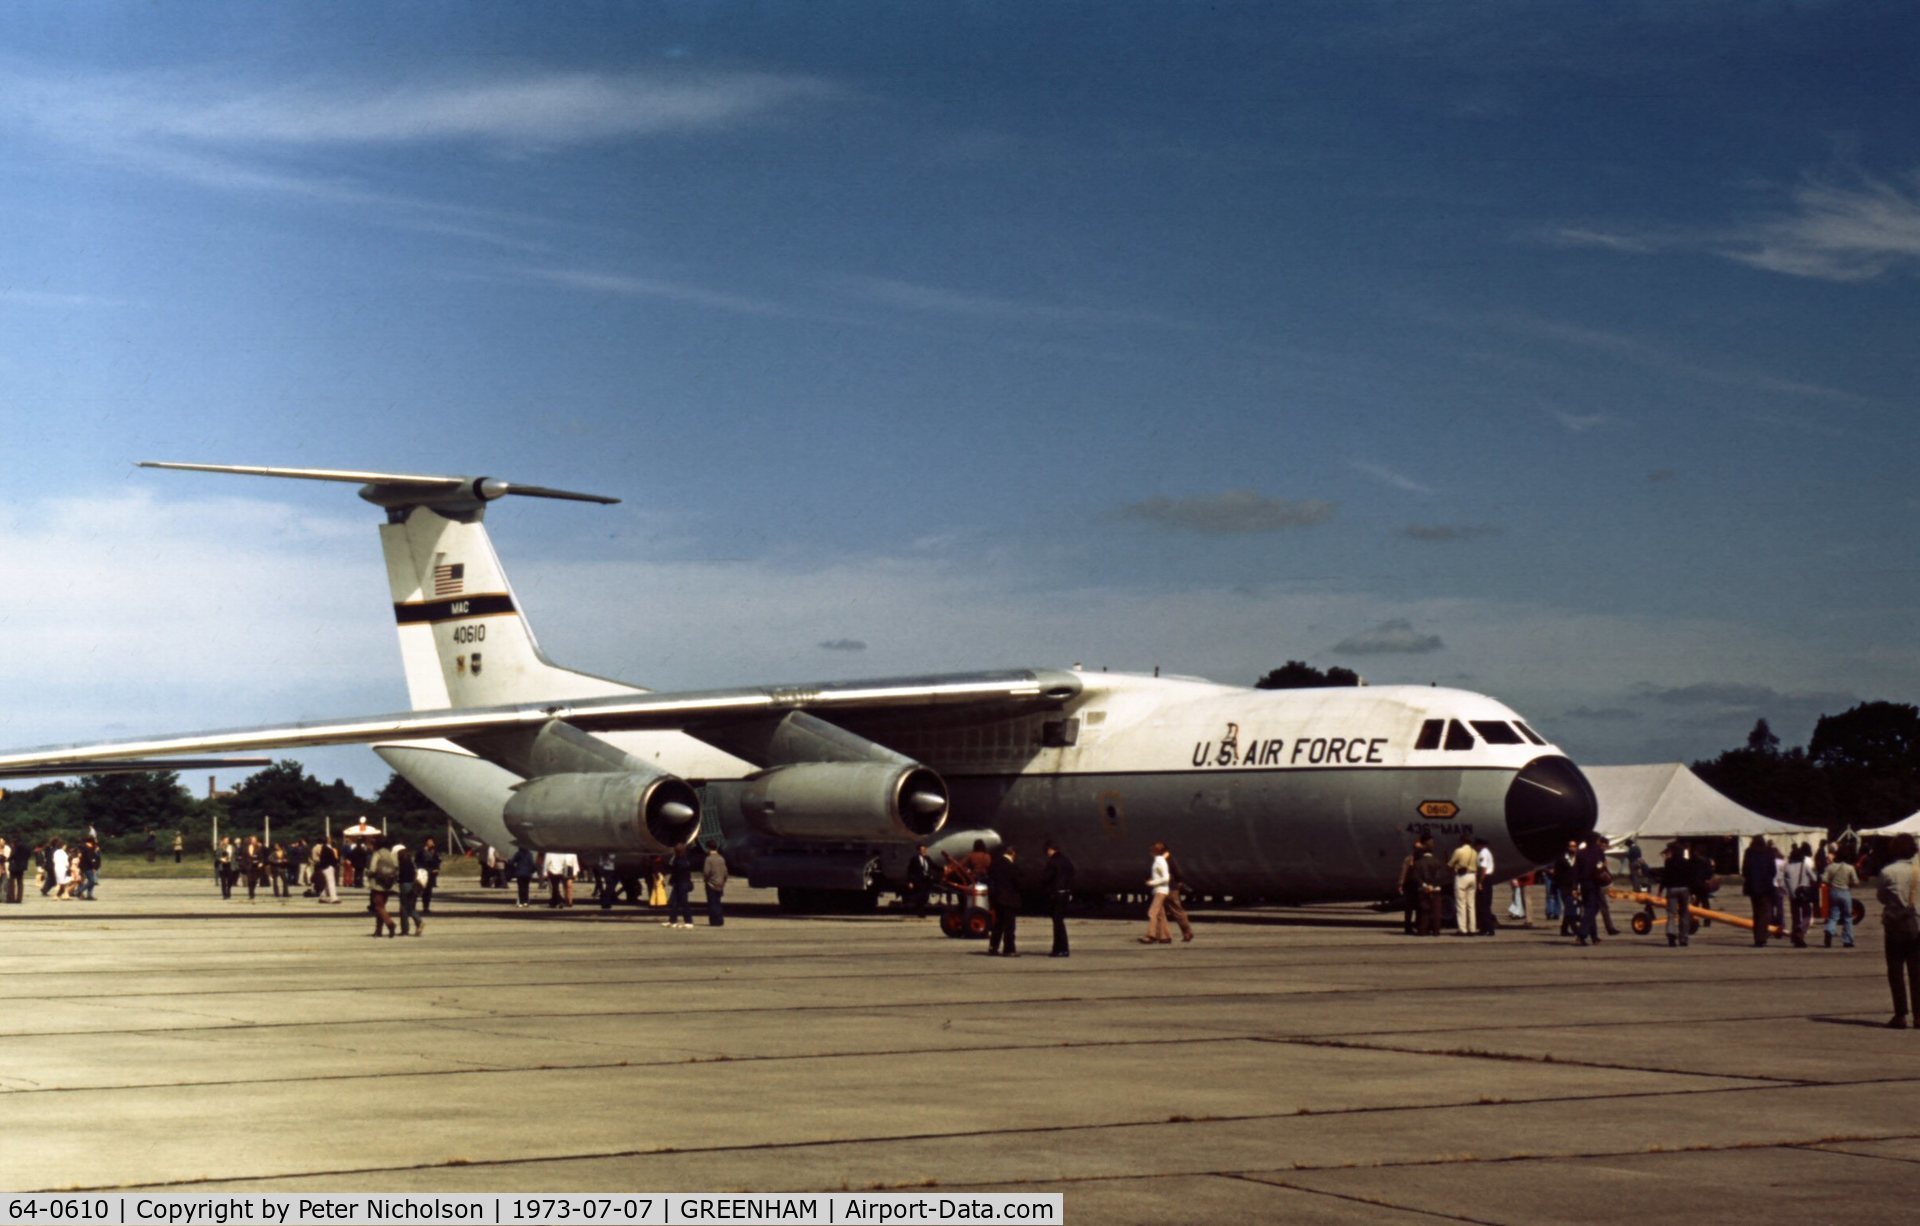 64-0610, 1964 Lockheed C-141A Starlifter C/N 300-6023, Another view of the 436th Military Airlift Wing's C-141A at the 1973 Intnl Air Tattoo at RAF Greenham Common.